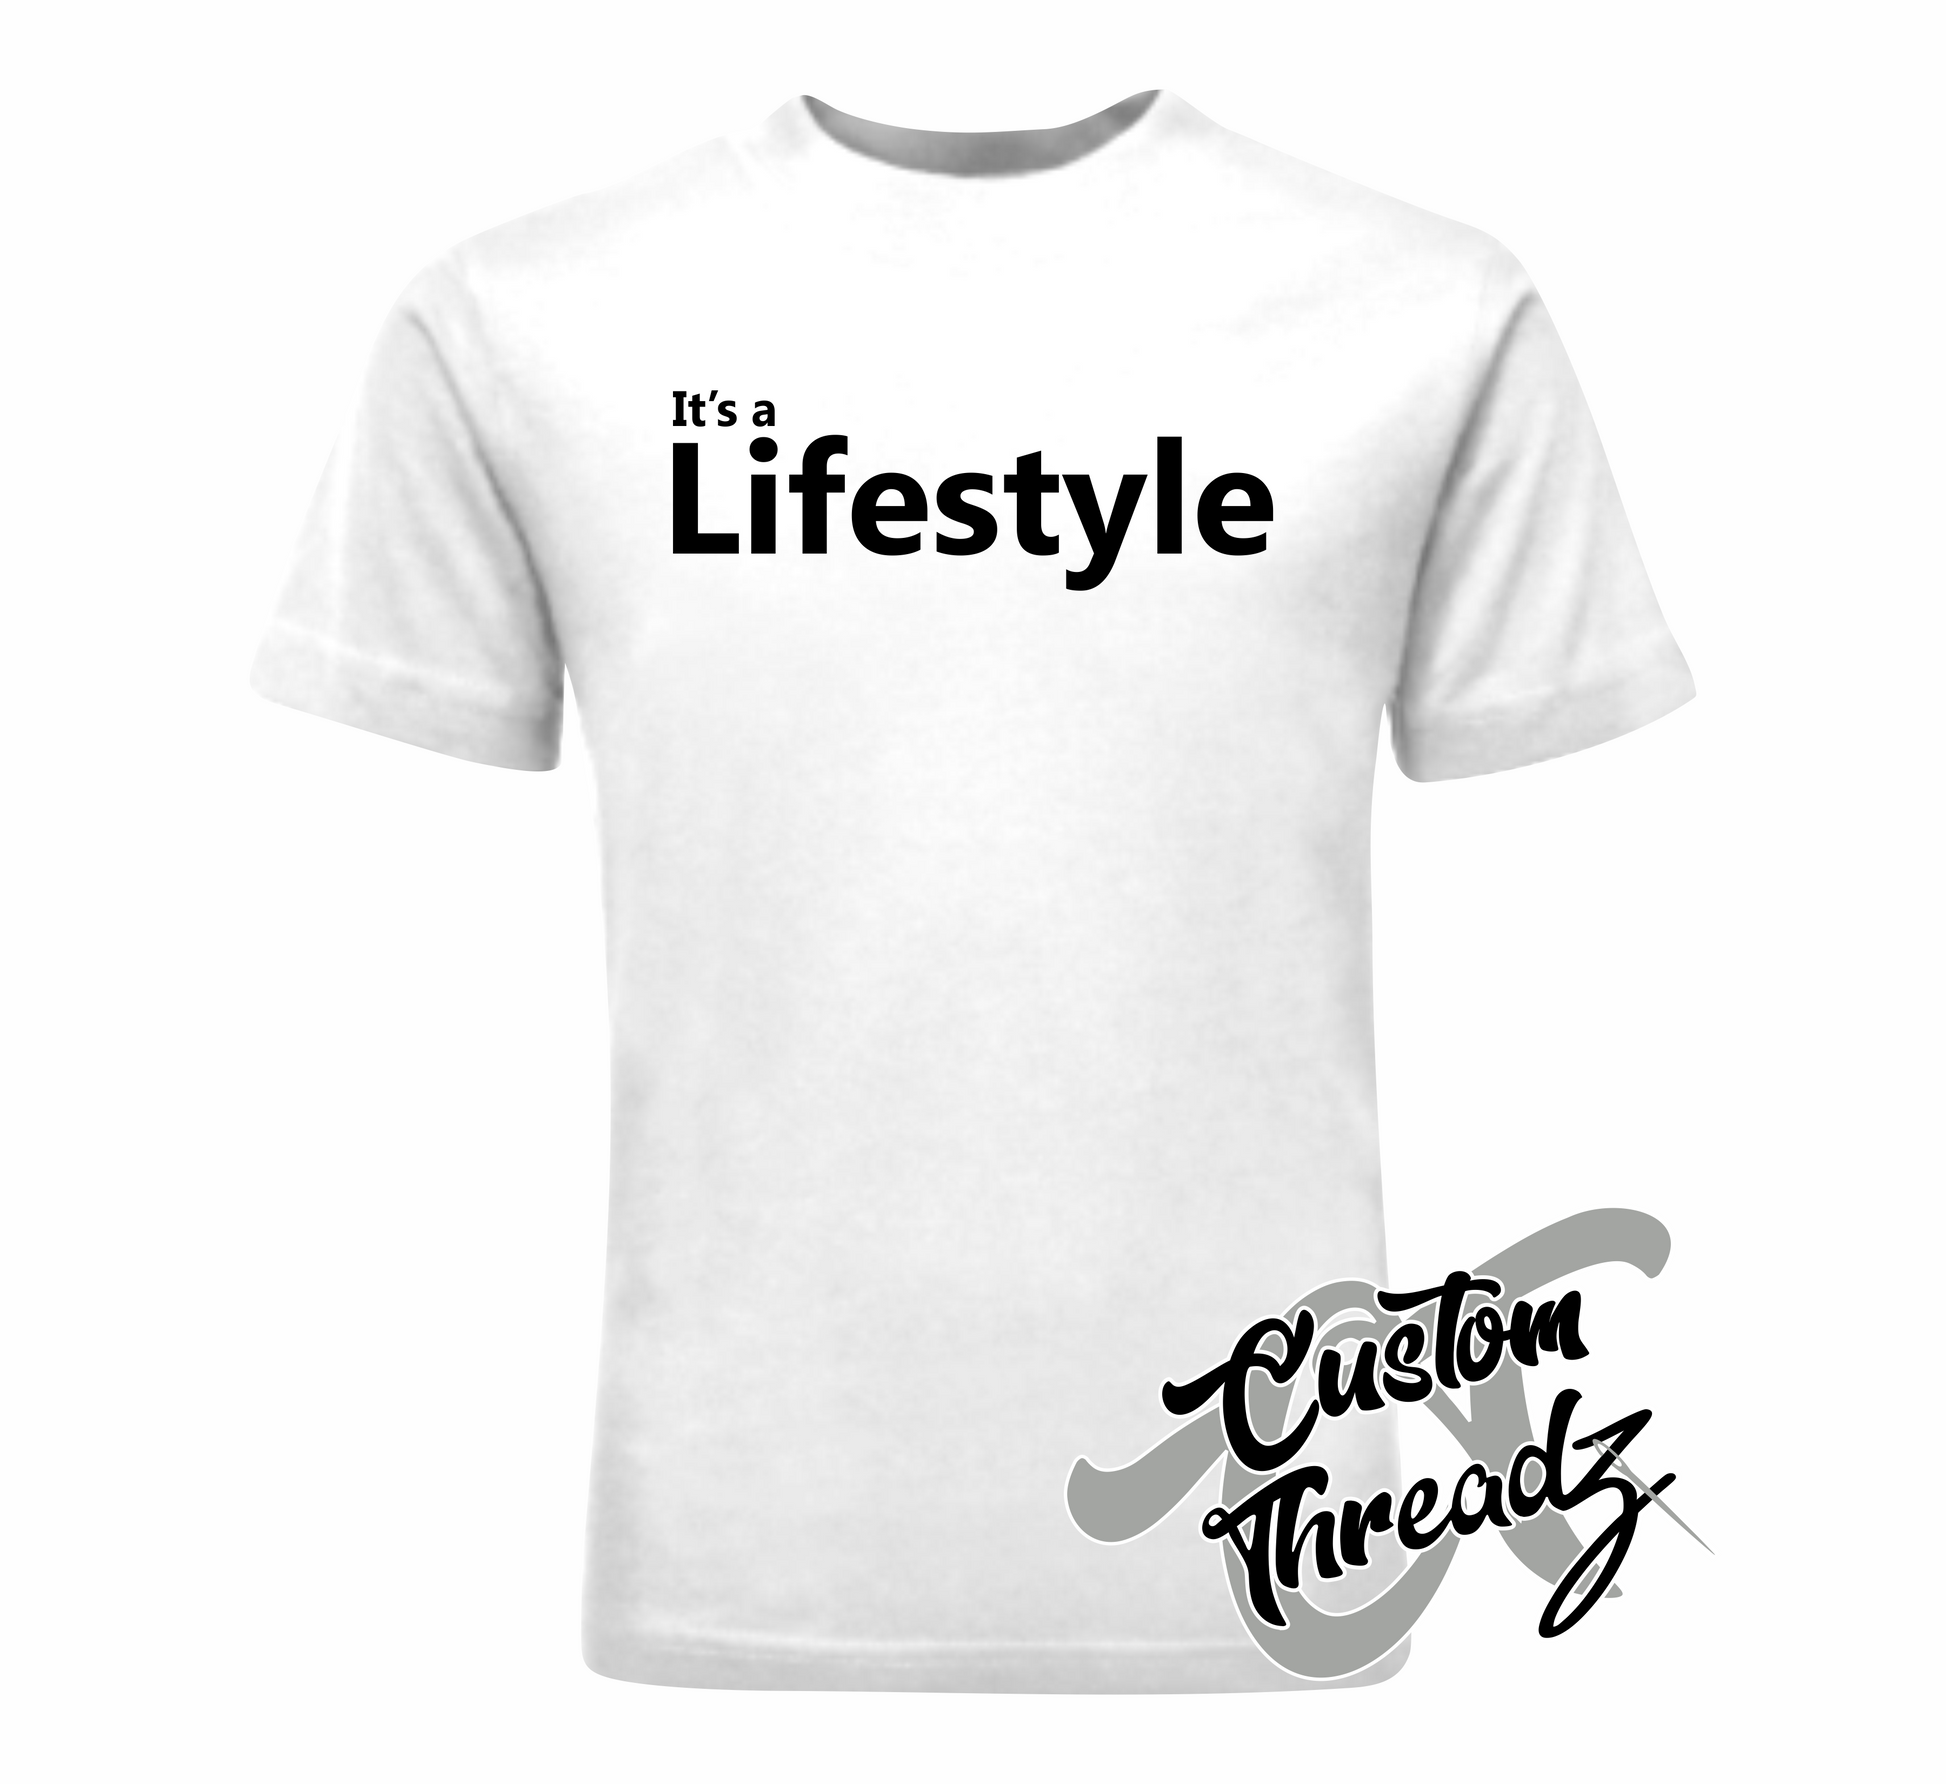 white tee with its a lifestyle DTG printed design